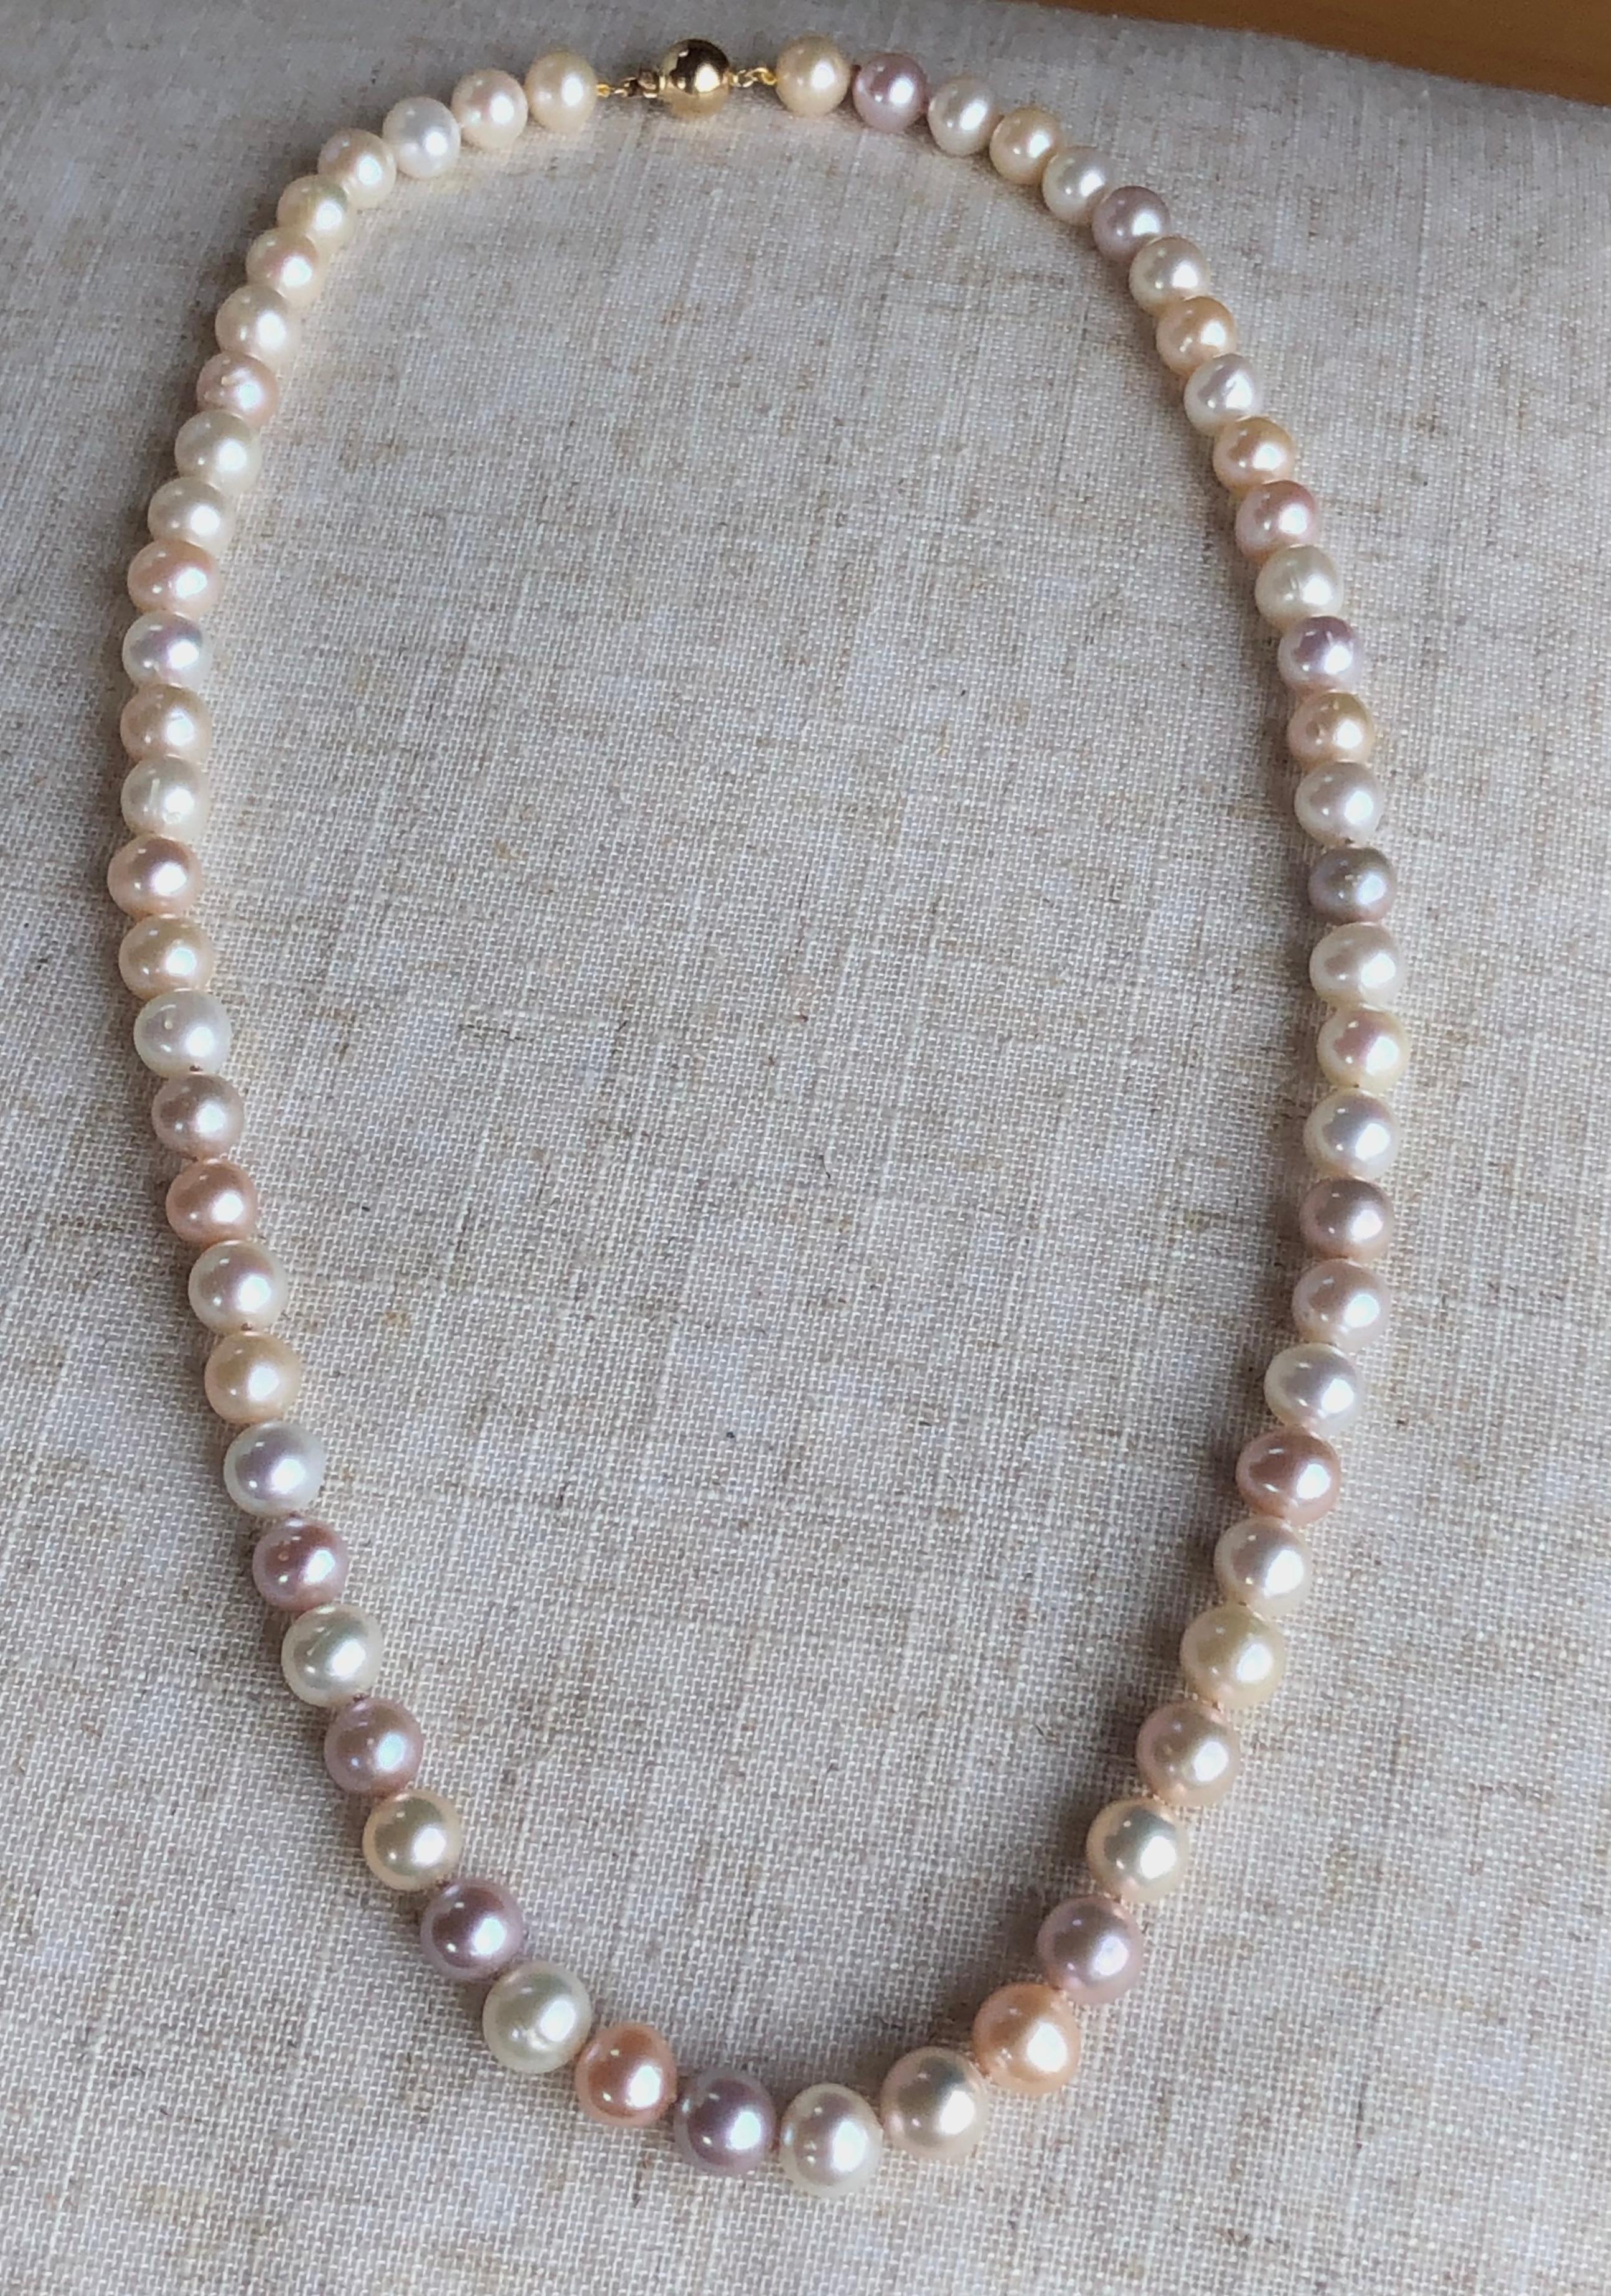 Cultured Lavander Pinkish Cream and White Pearl Necklace, pearls from 10mm to 10.5mm. Luster: very good and the necklace is finished with a round 14k yellow gold ball clasp. The stunning necklace is a 25-inch long. 
Note: Pearls have been